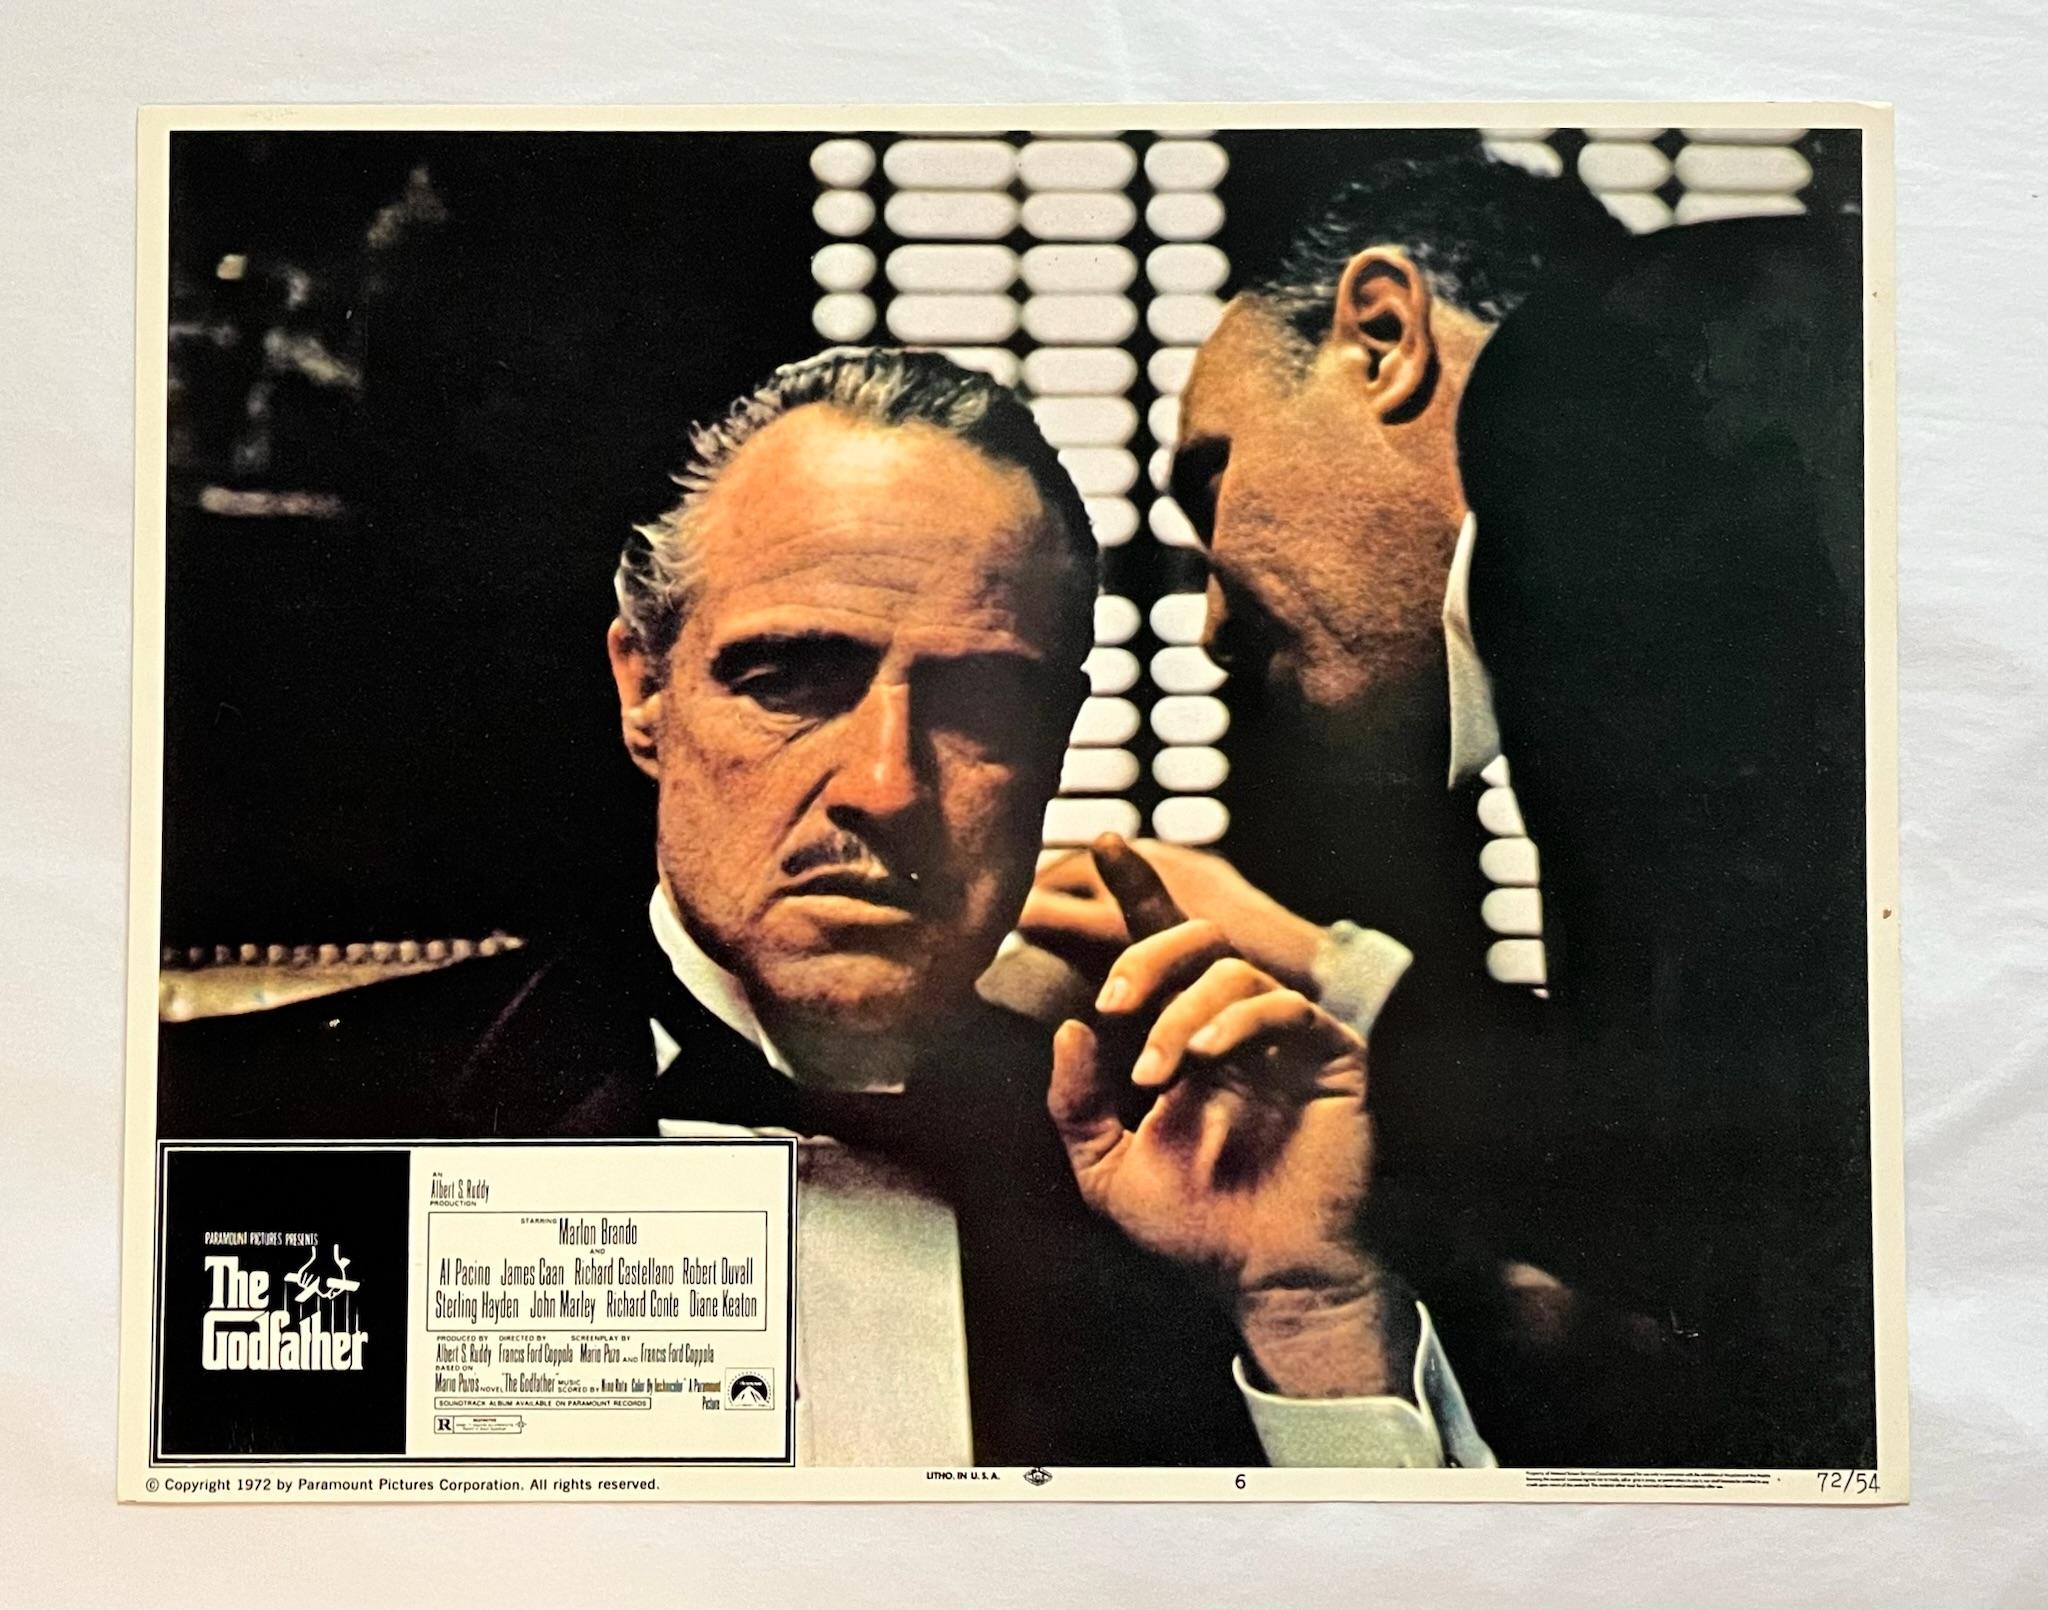 The Godfather - Original 1972 Lobby Card #6 - Print by Unknown